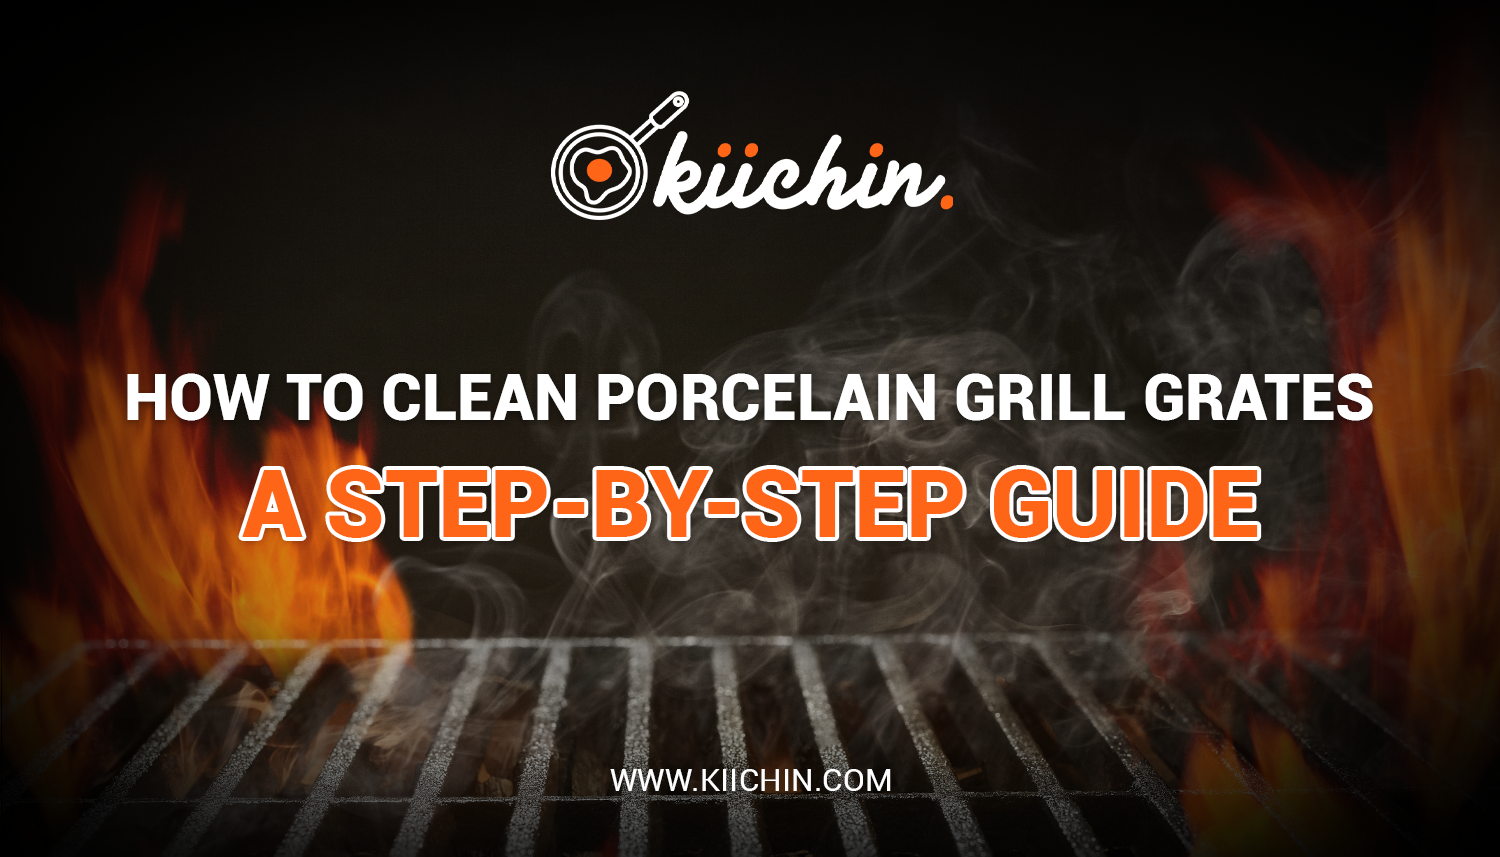 How to clean porcelain grill grates: A Step-by-Step Guide